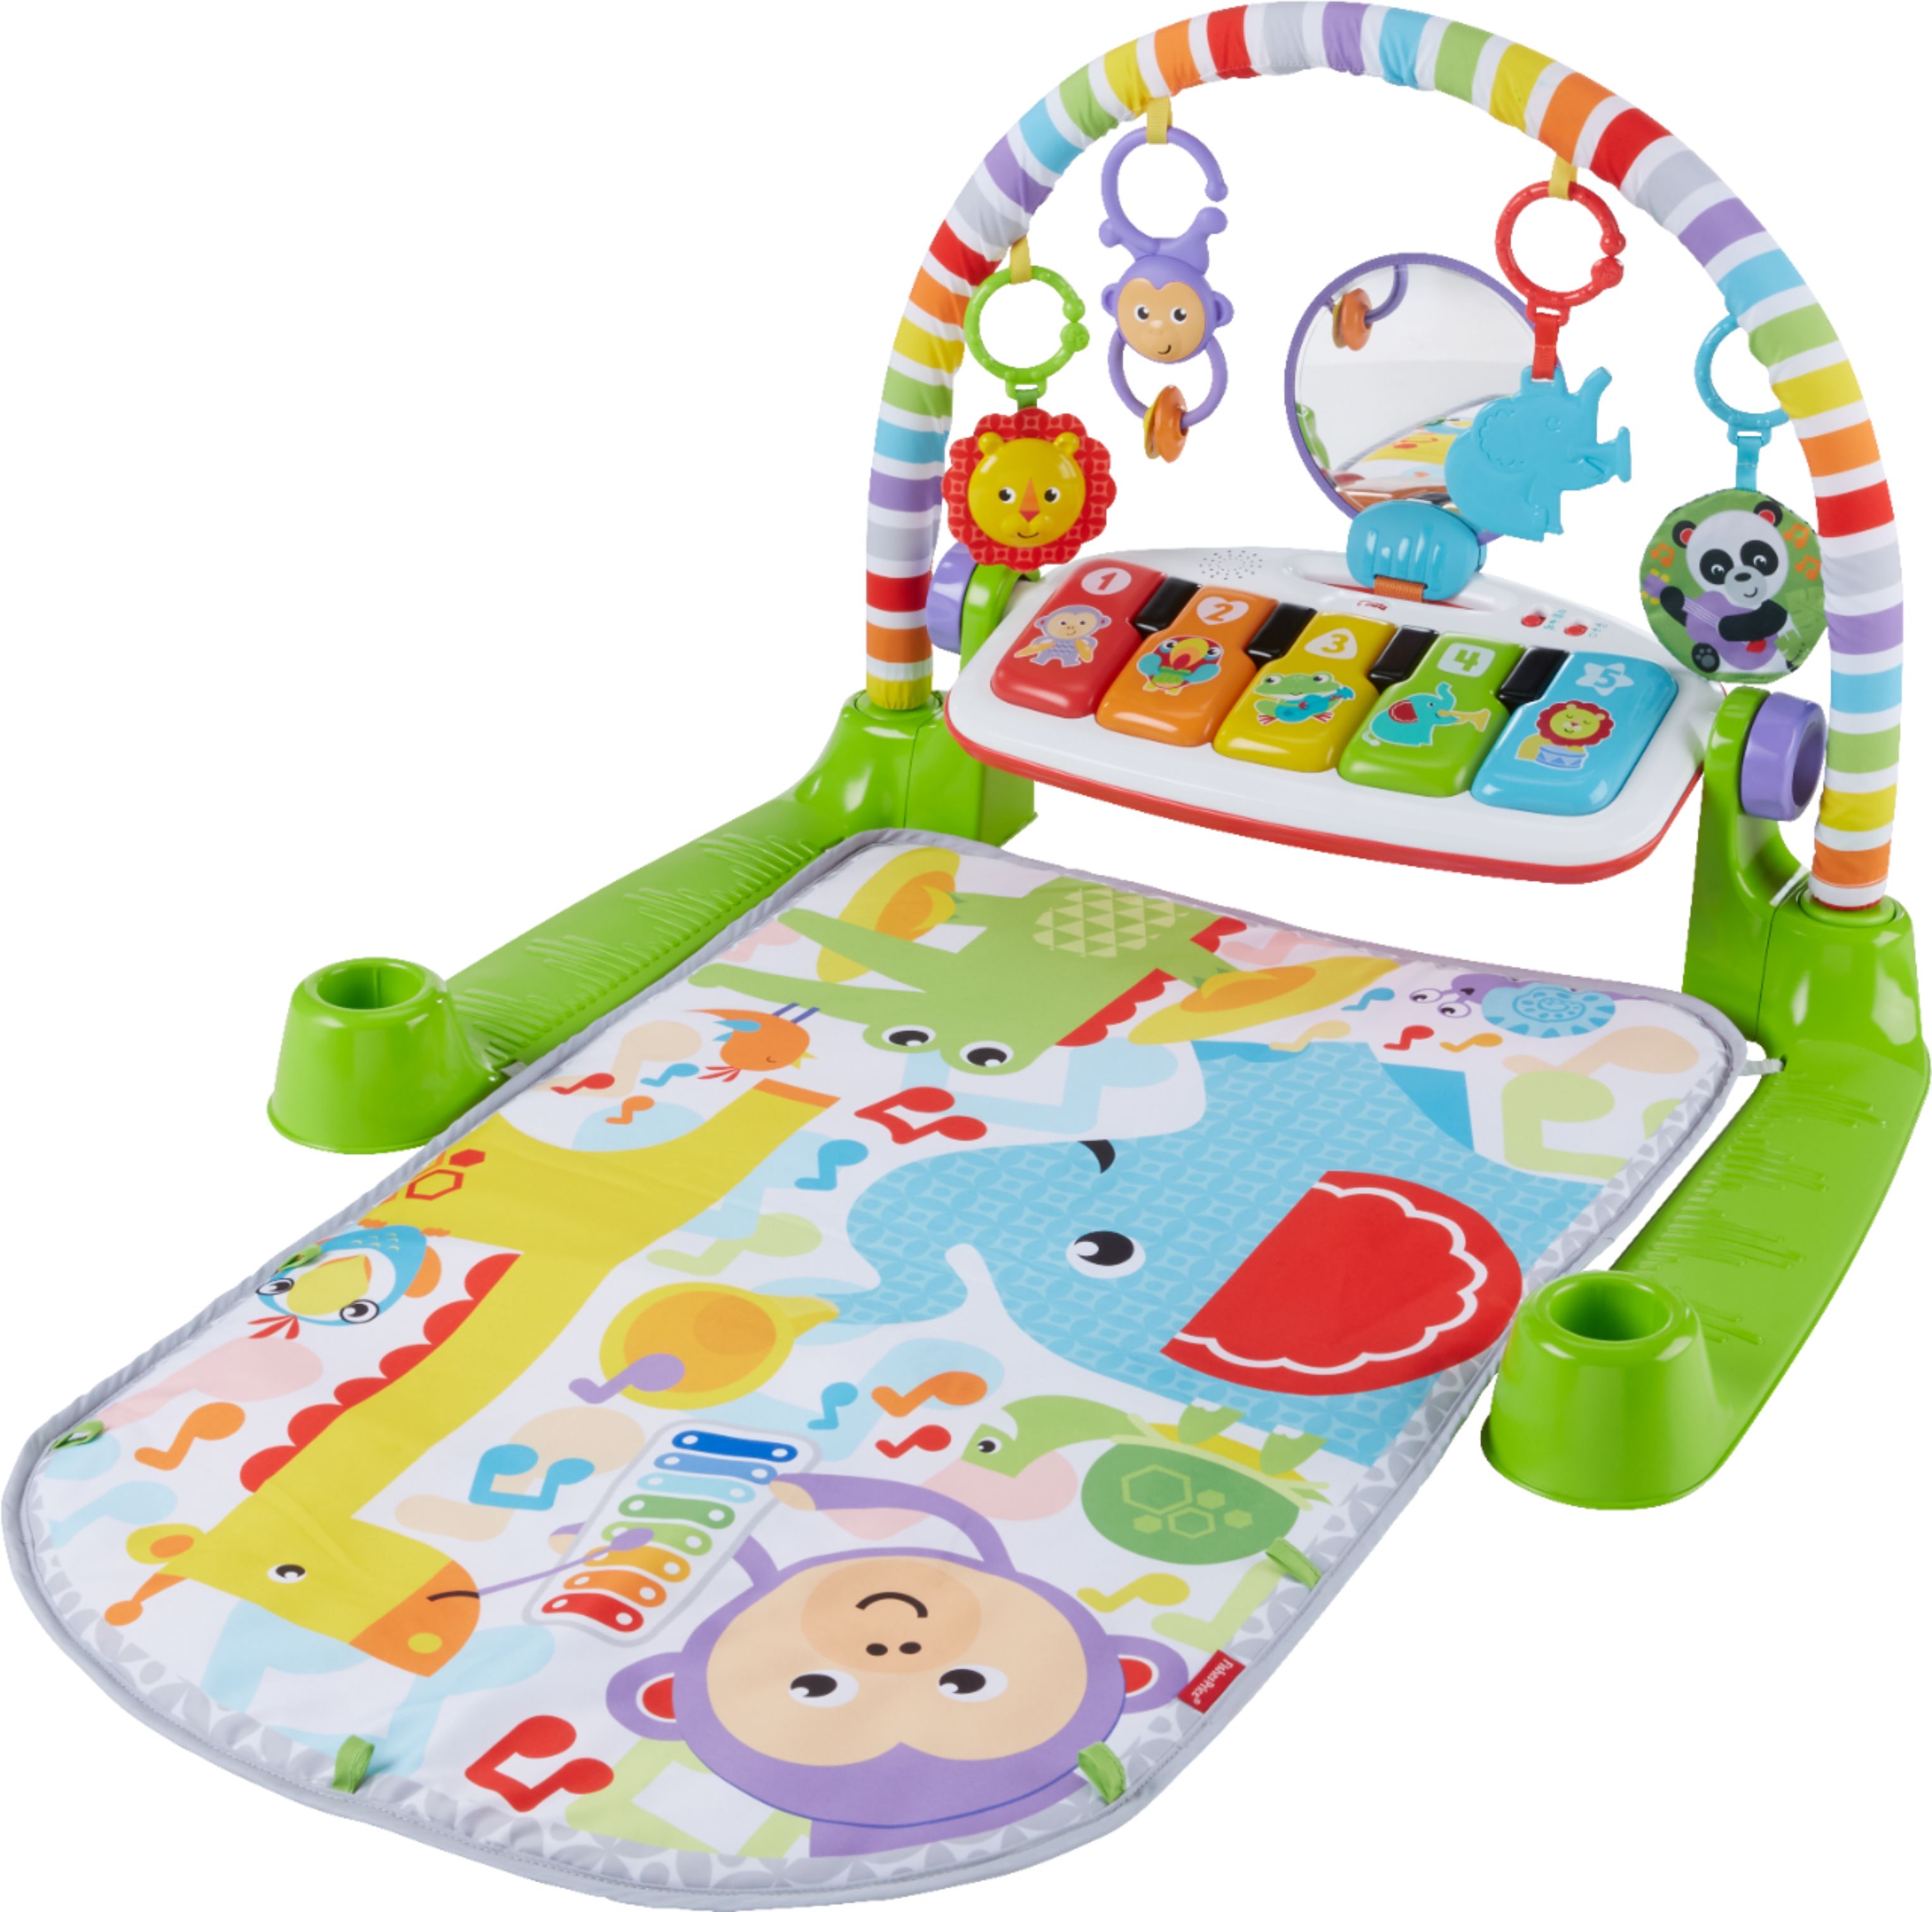 Left View: Fisher-Price - Deluxe Kick & Play Piano Gym